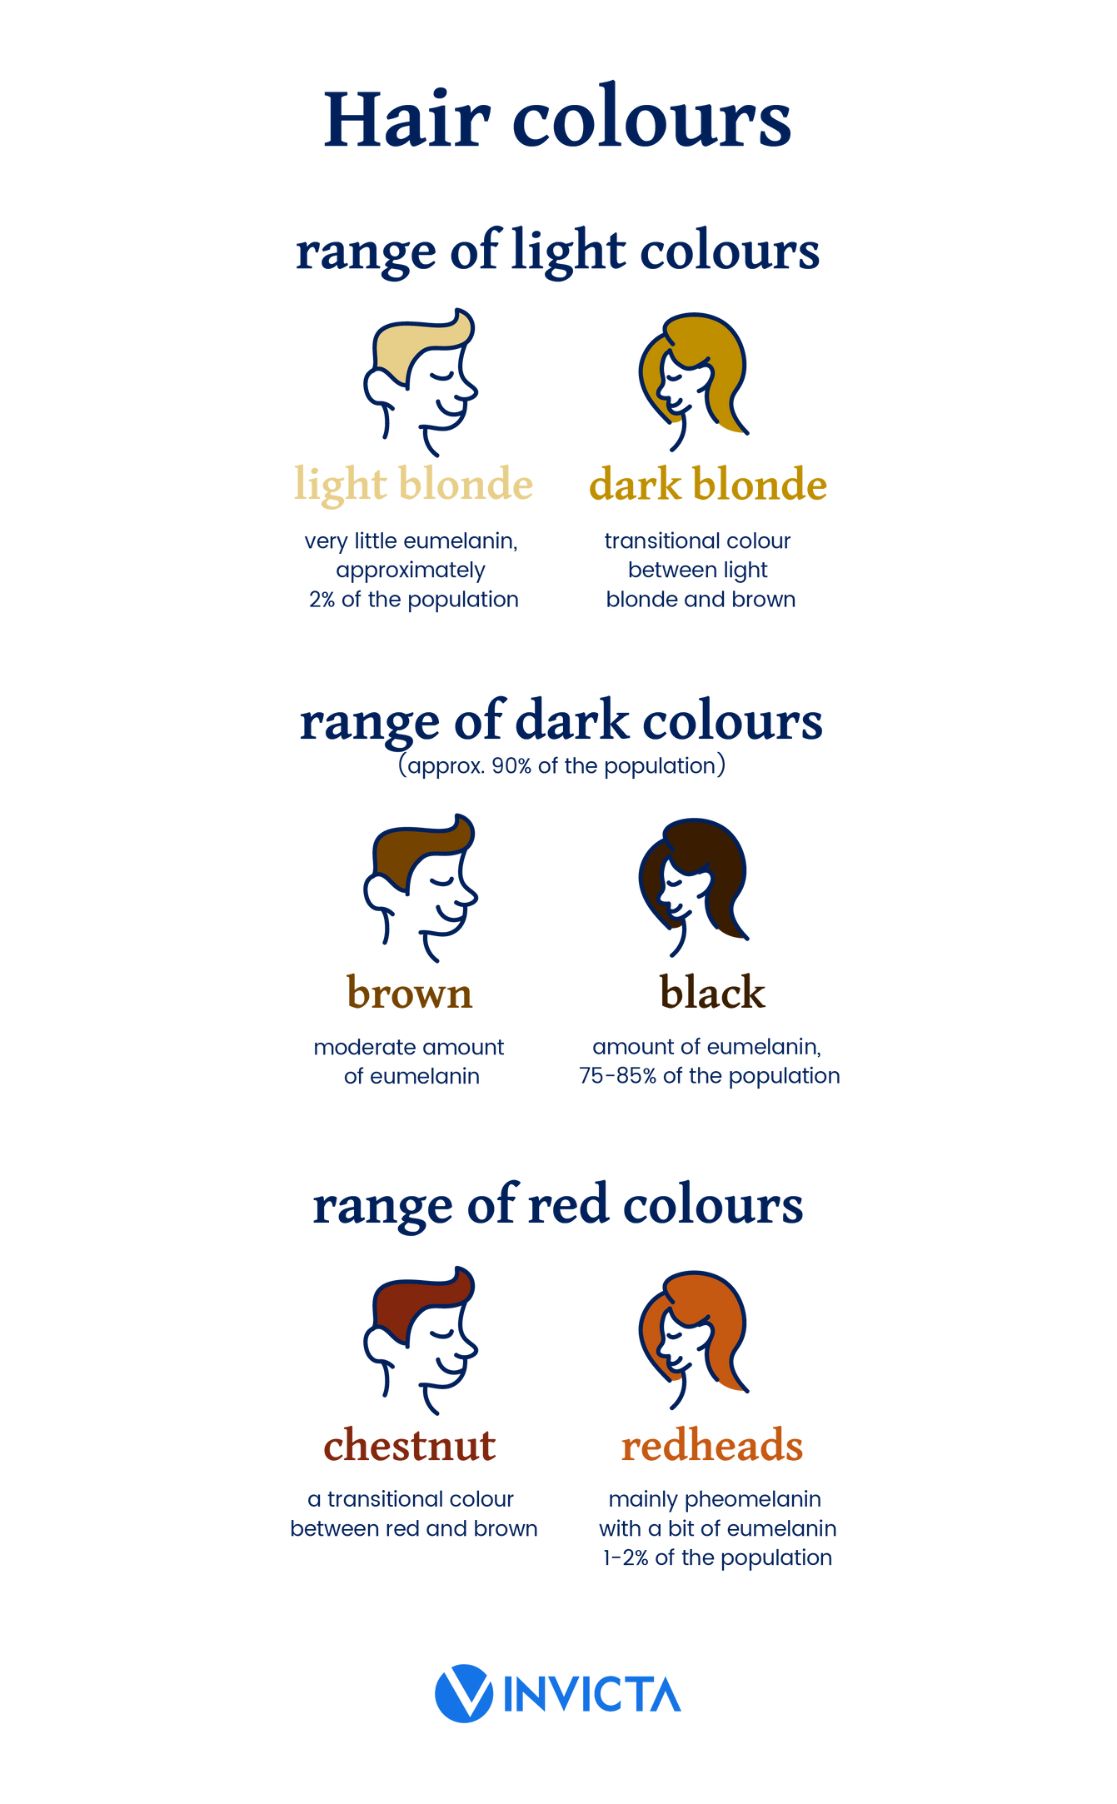 colours of hair